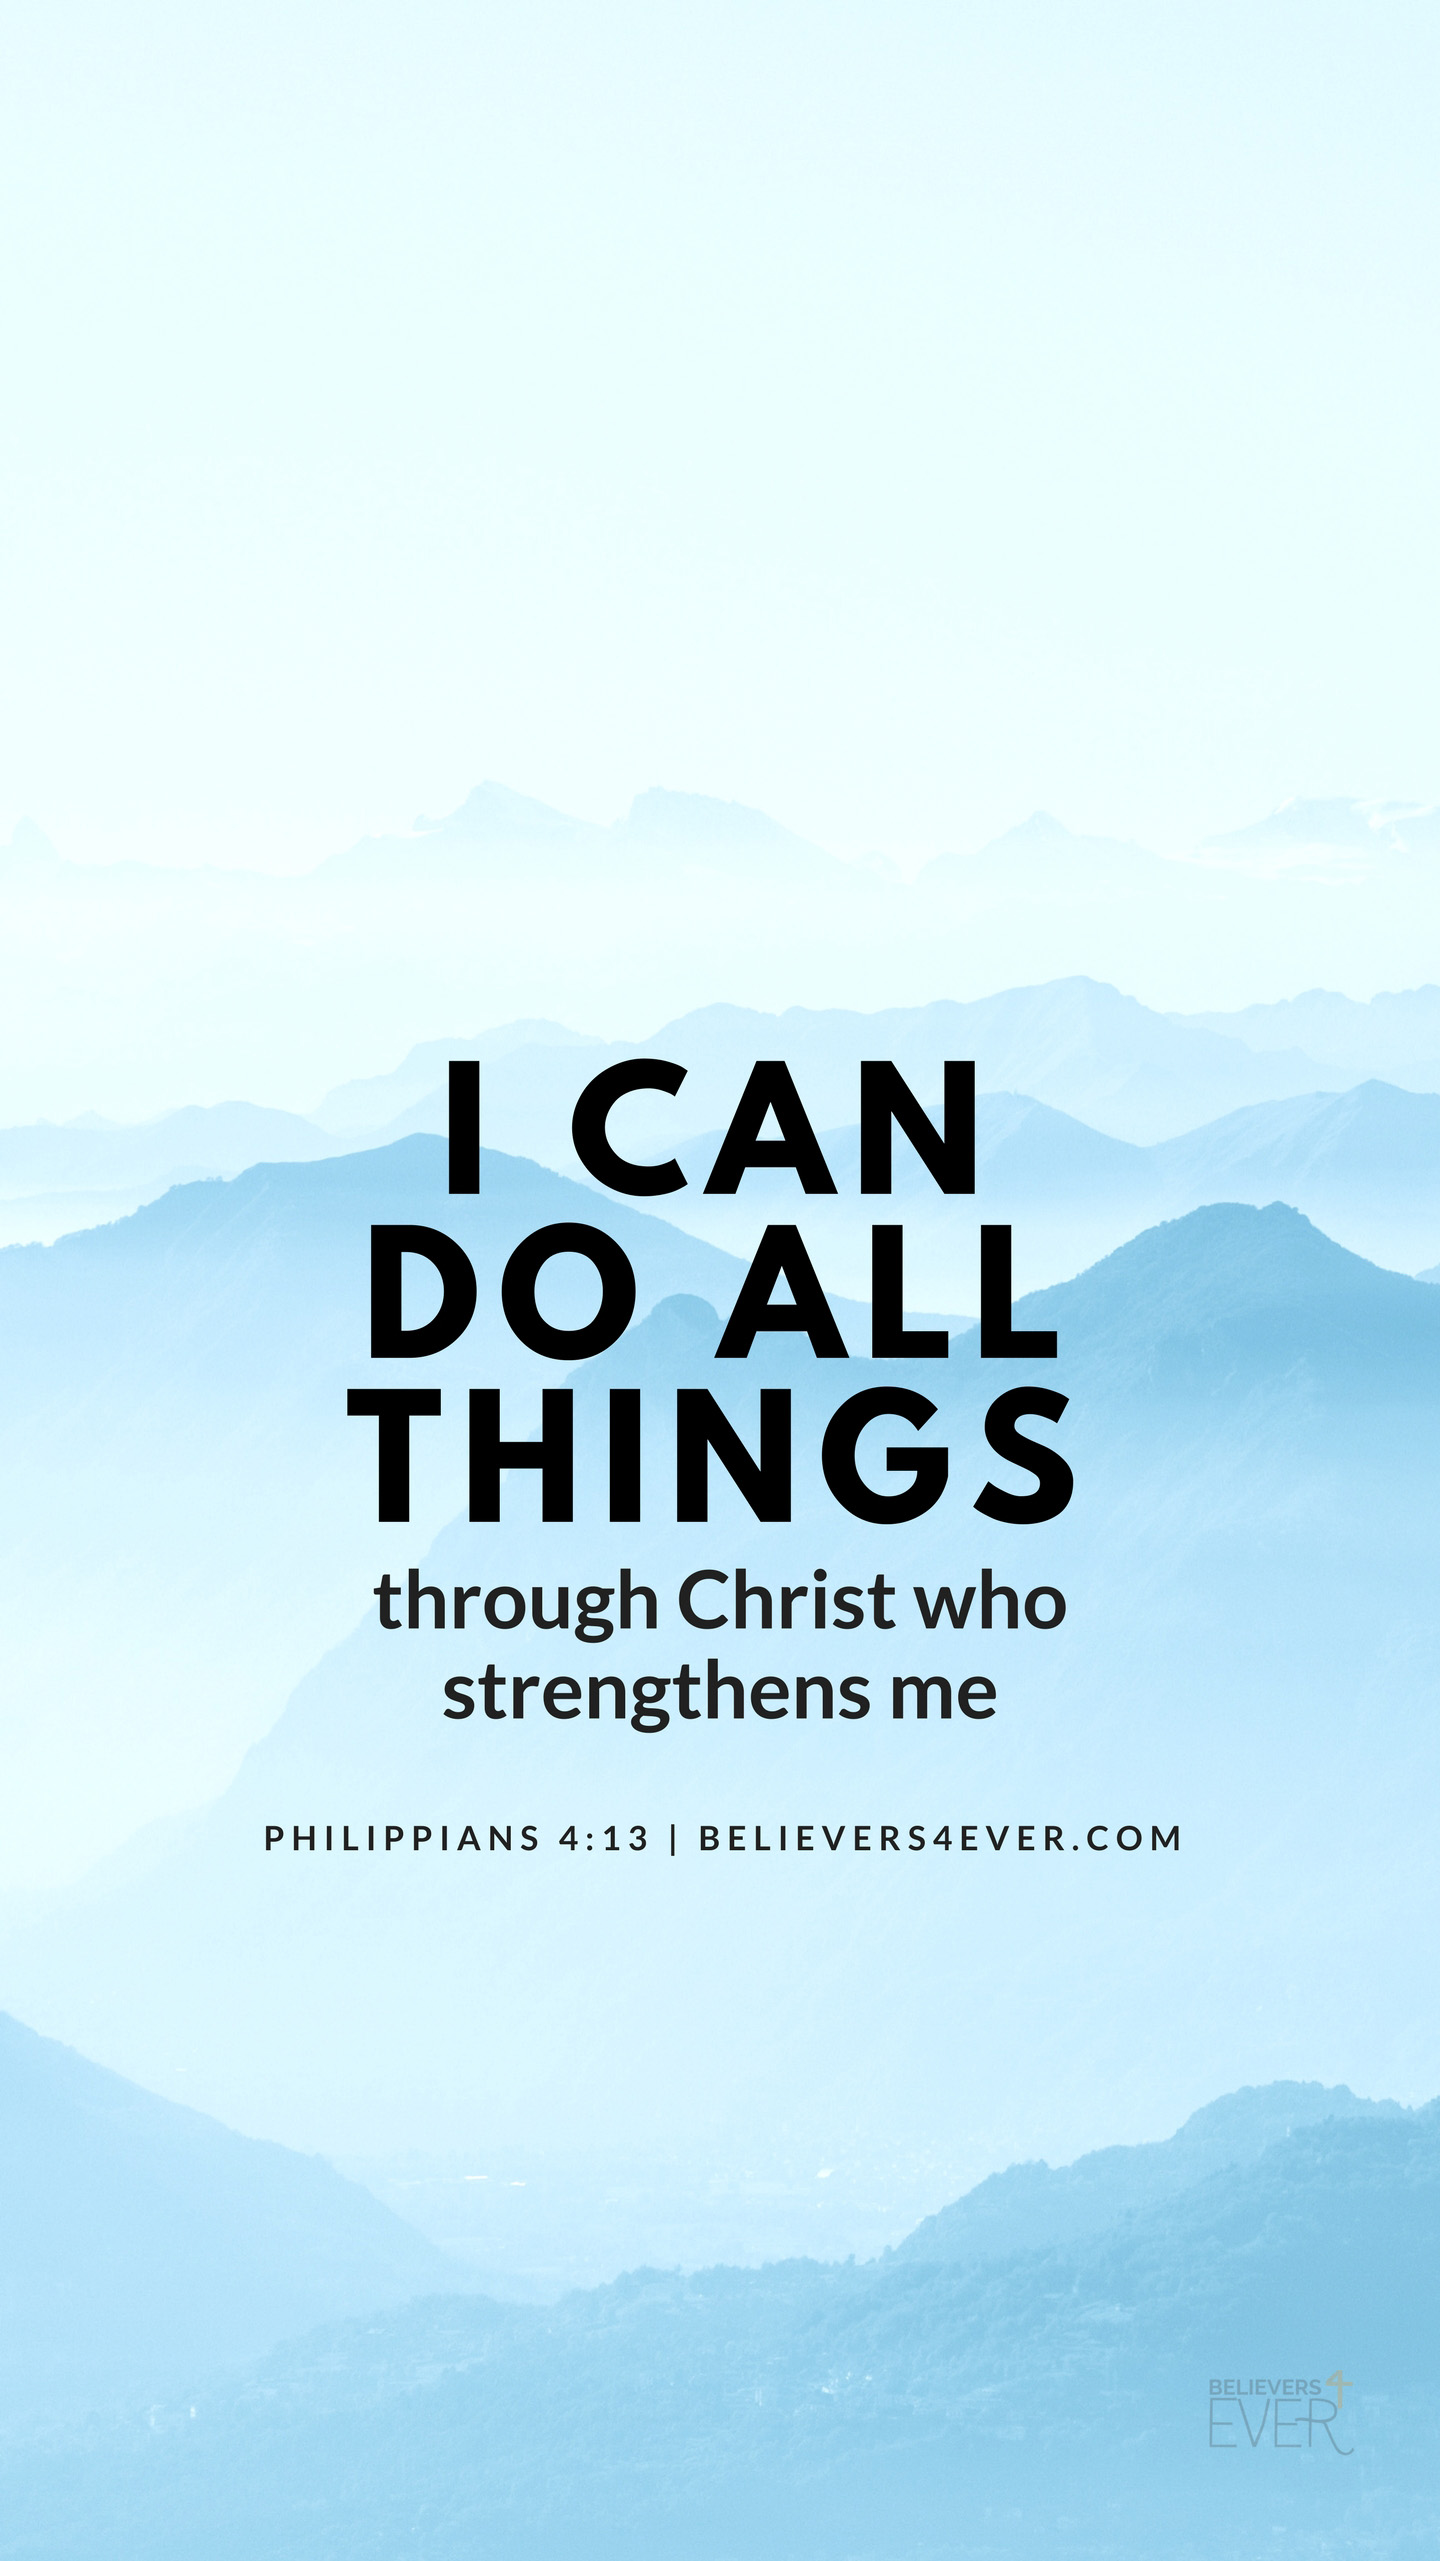 I Can Do All Things Believers4ever